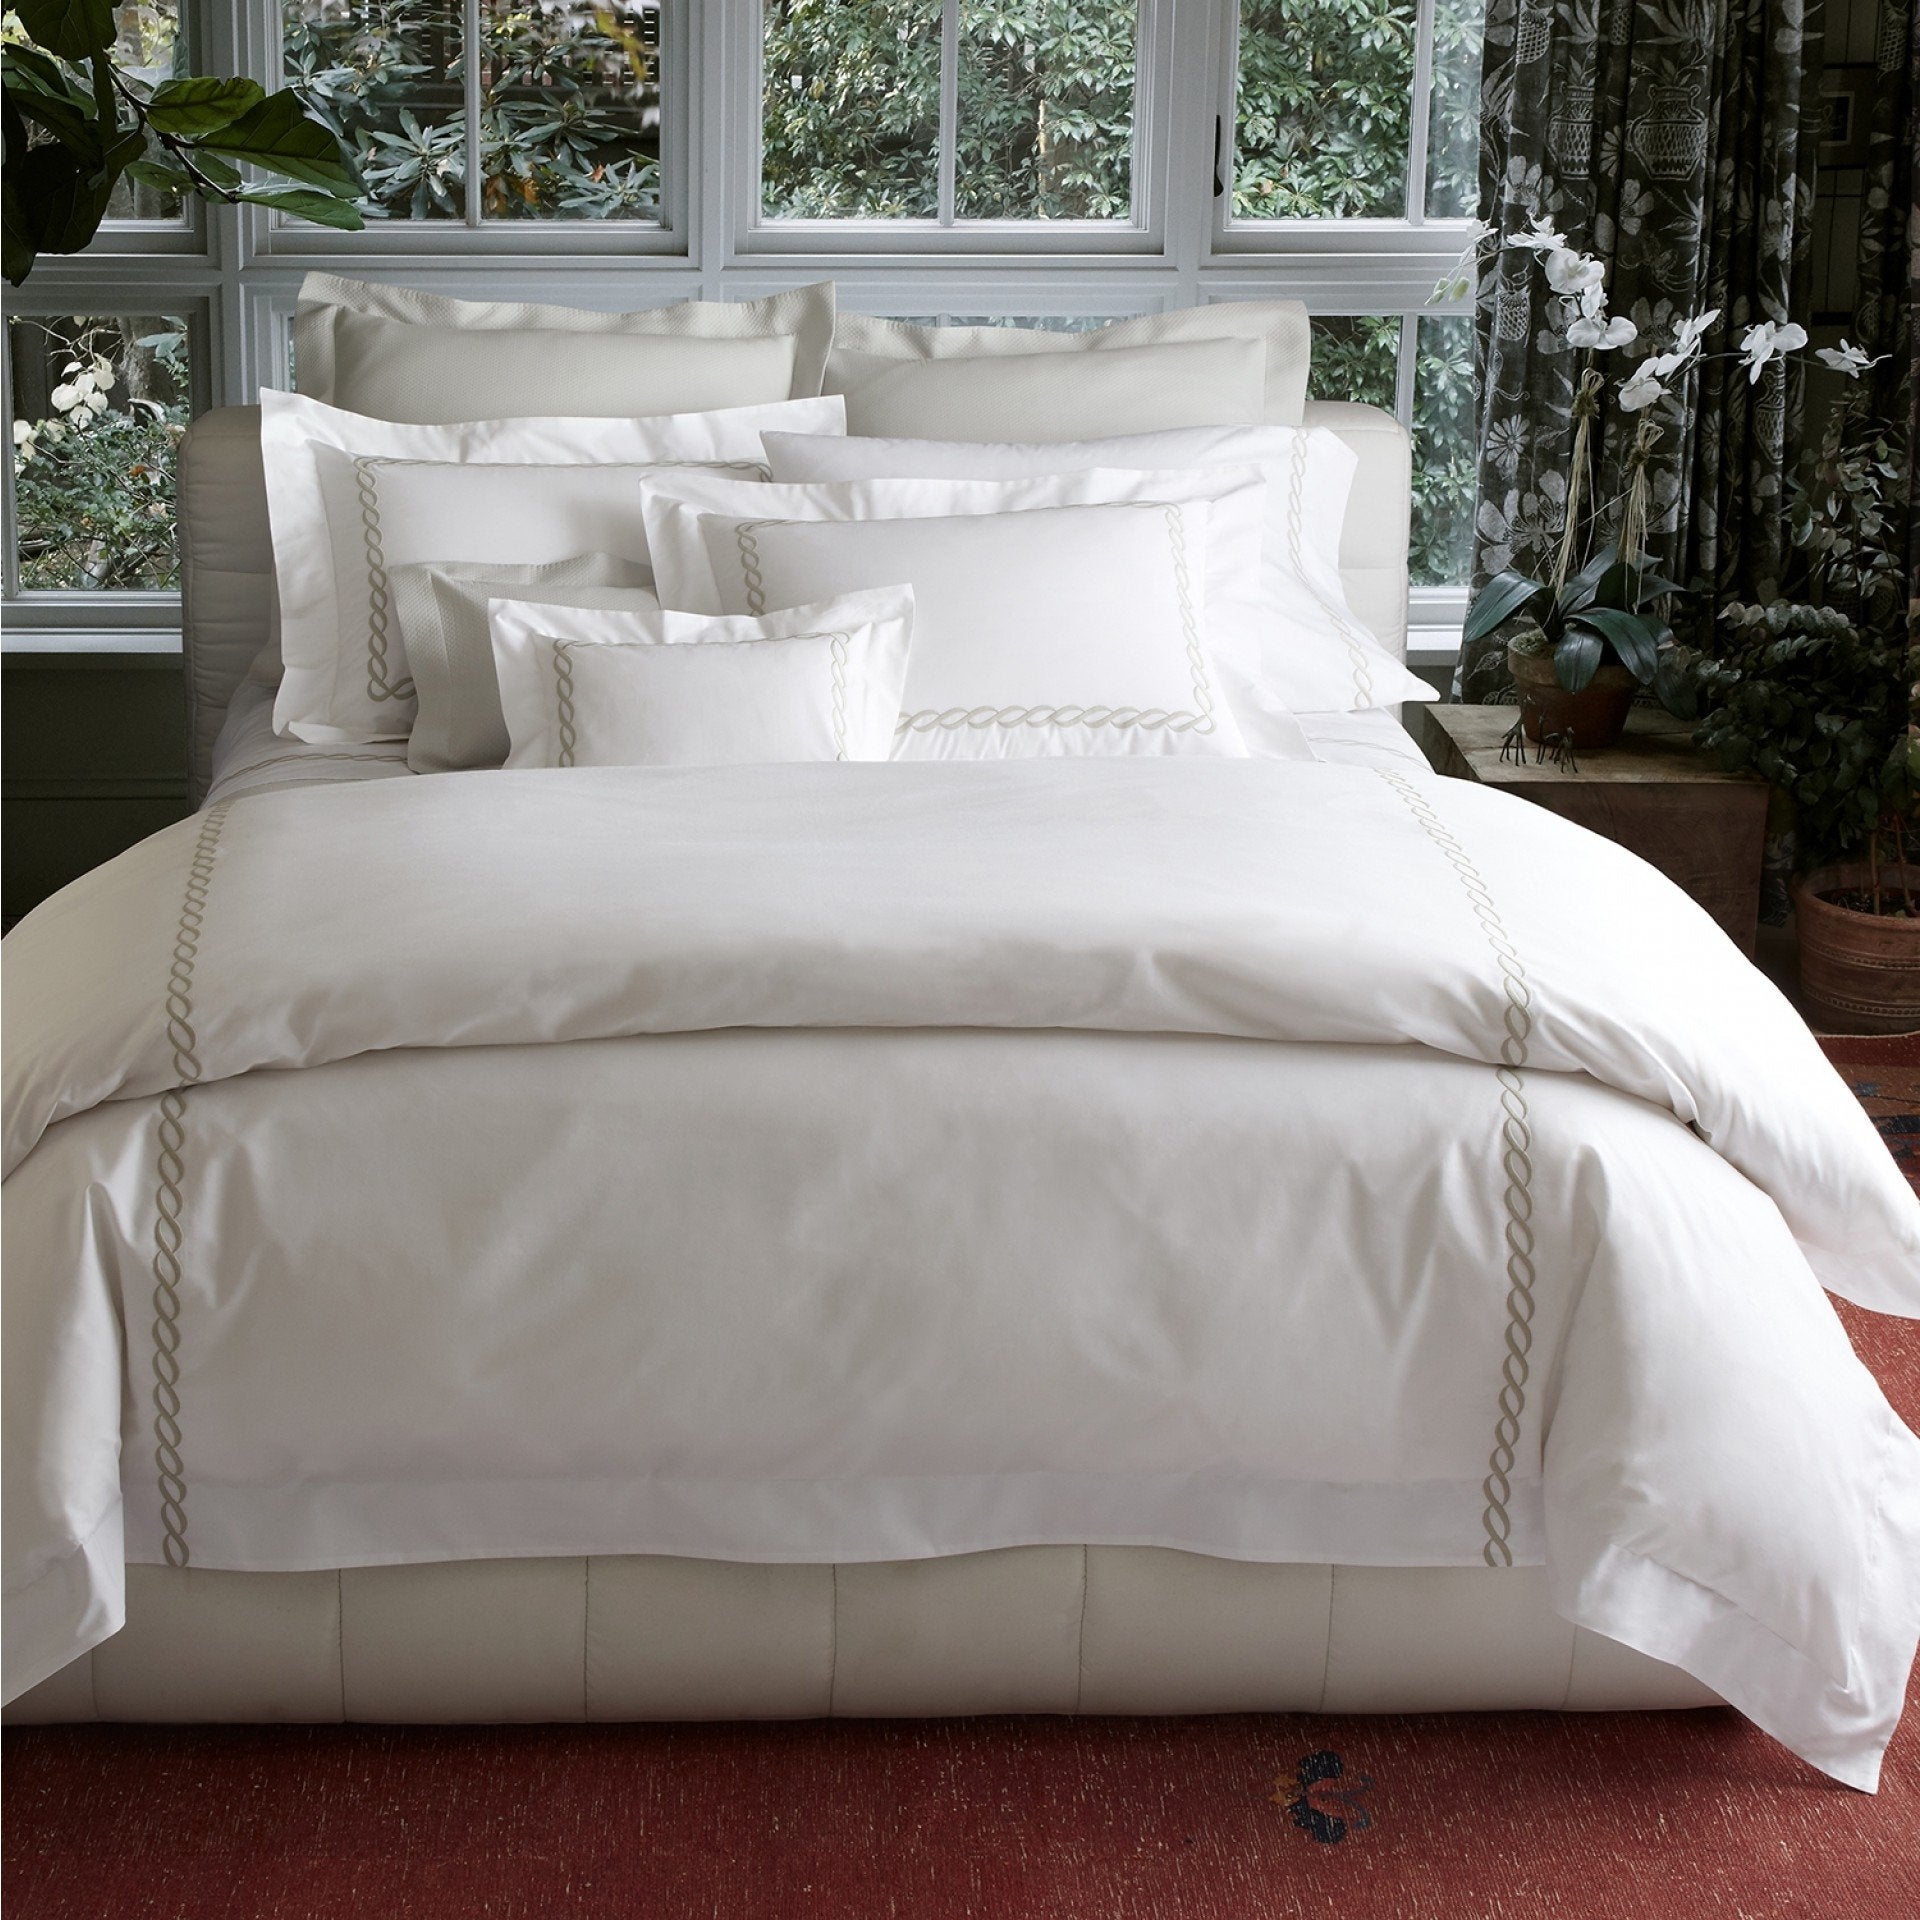 Matouk Luxury Bedding - Classic Chain Percale Duvet, Sheets and cases - Fig Linens